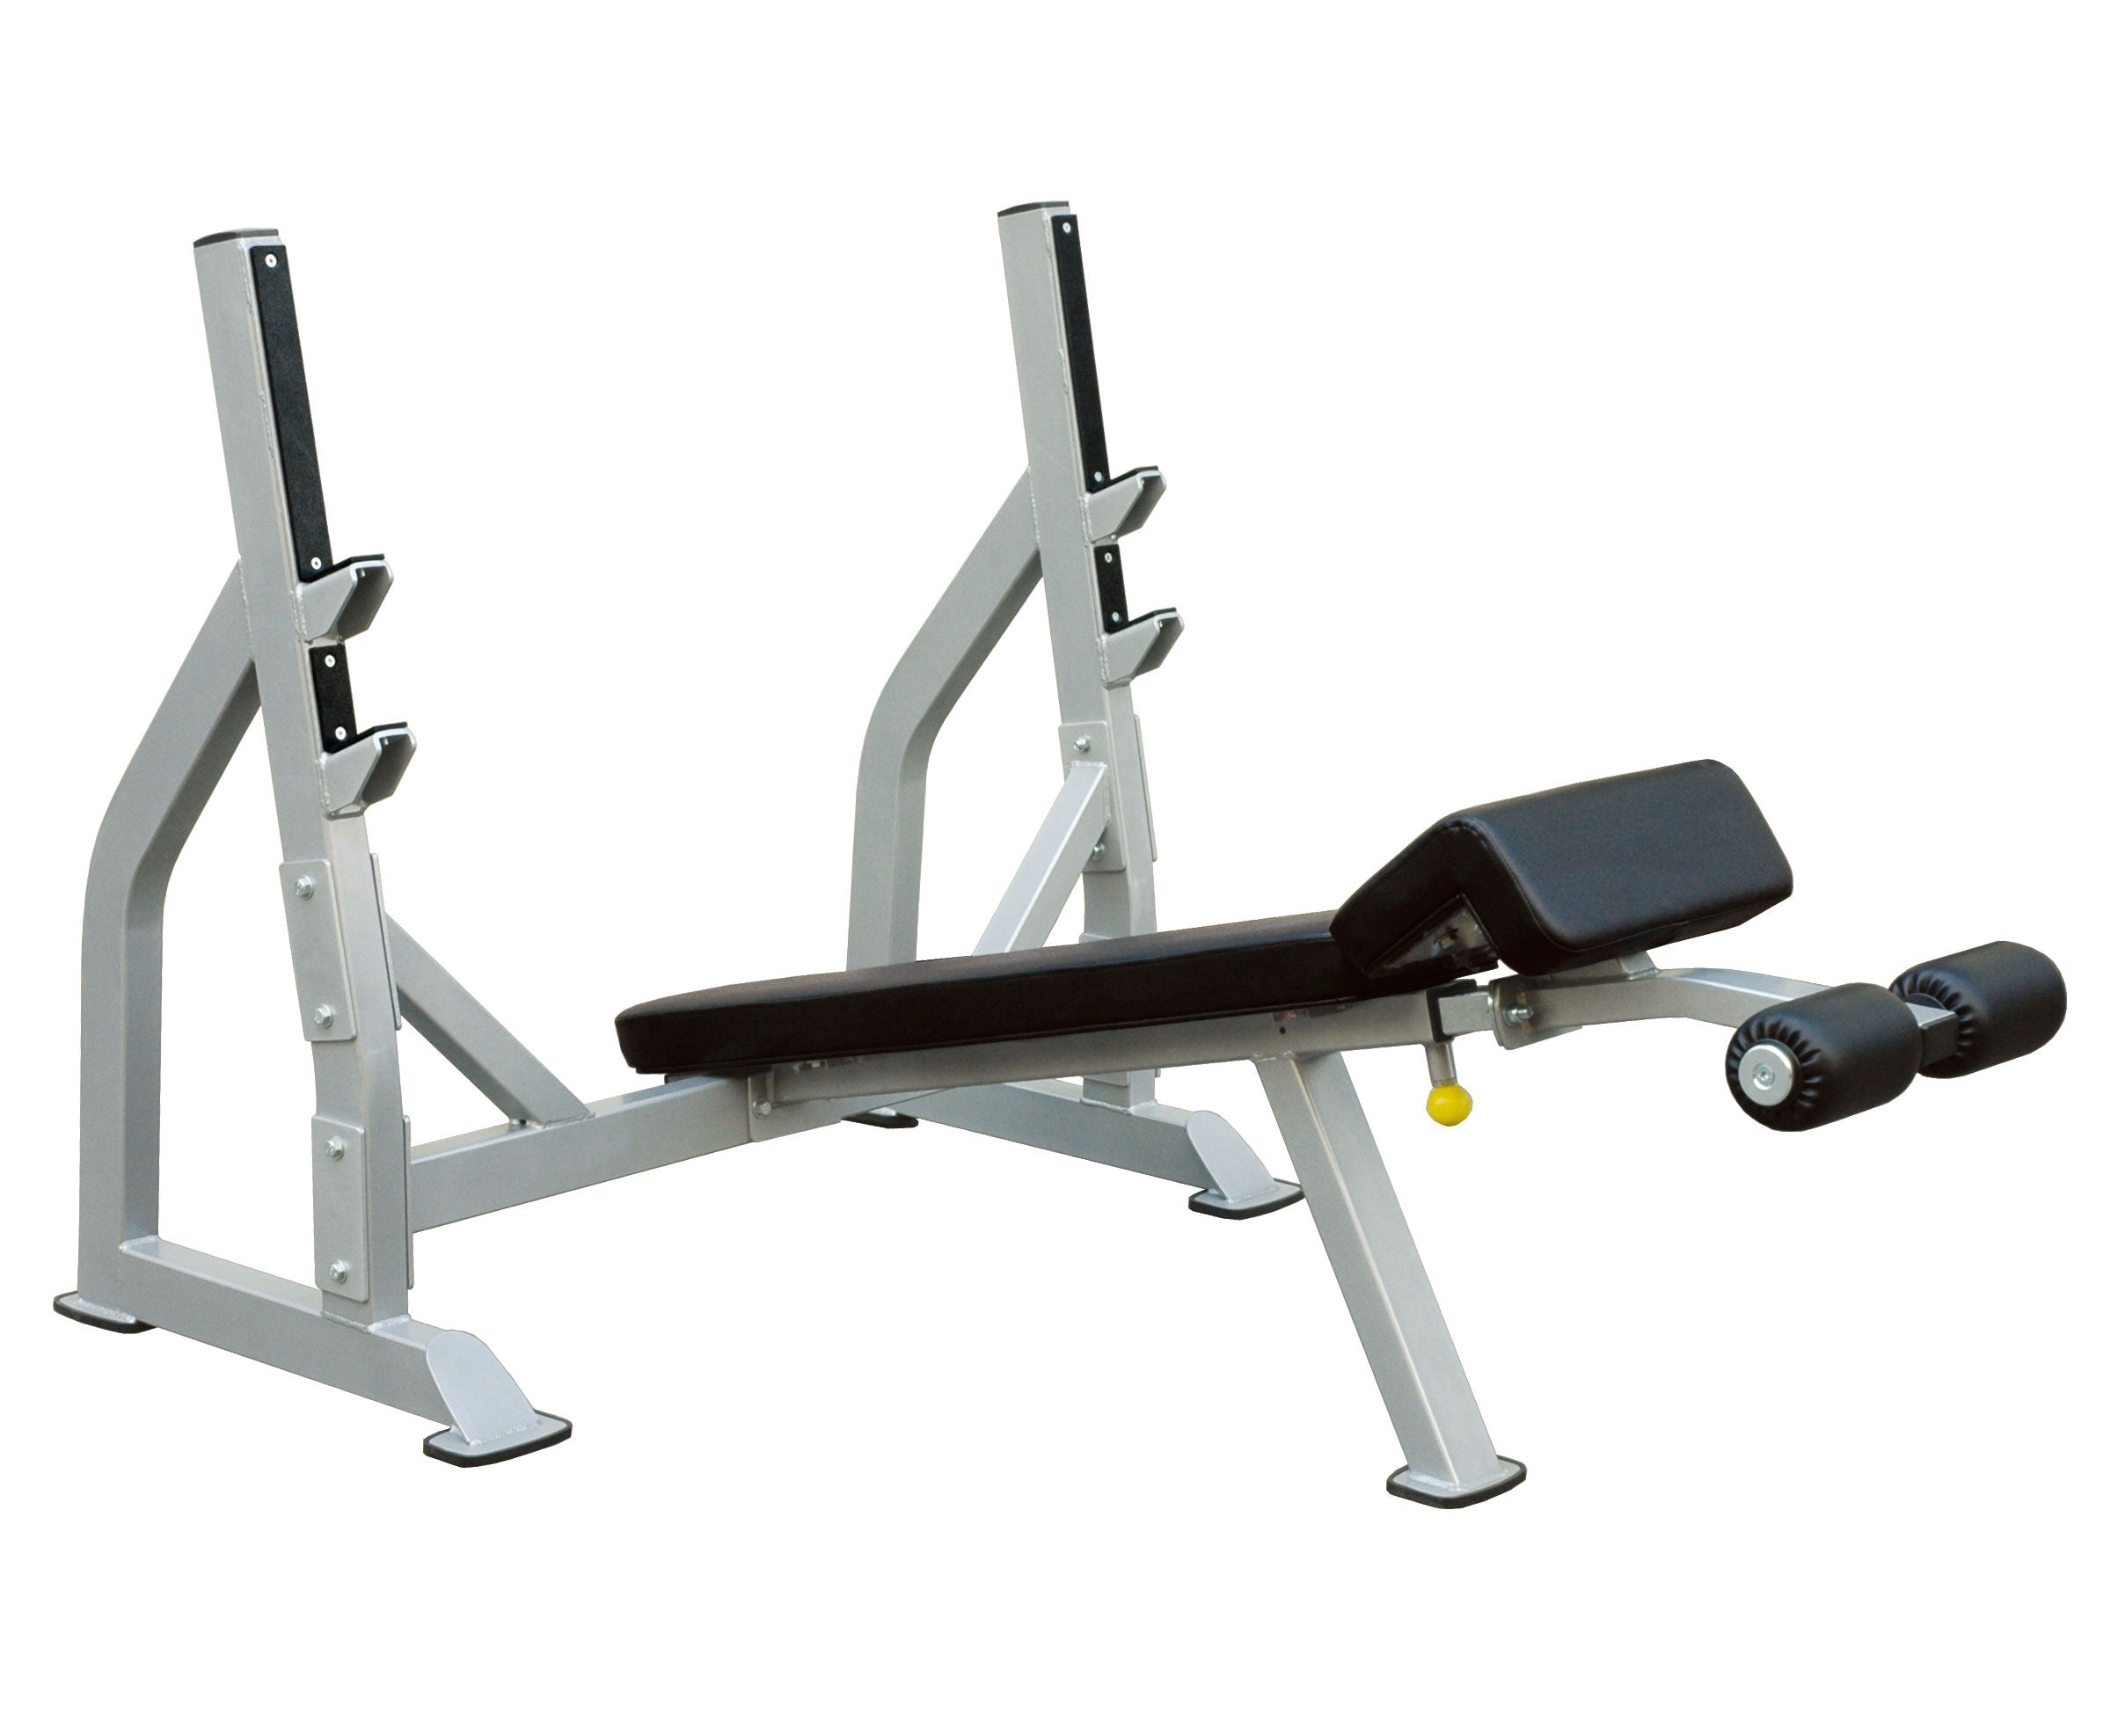 GymGear Pro Series Olympic Decline Bench